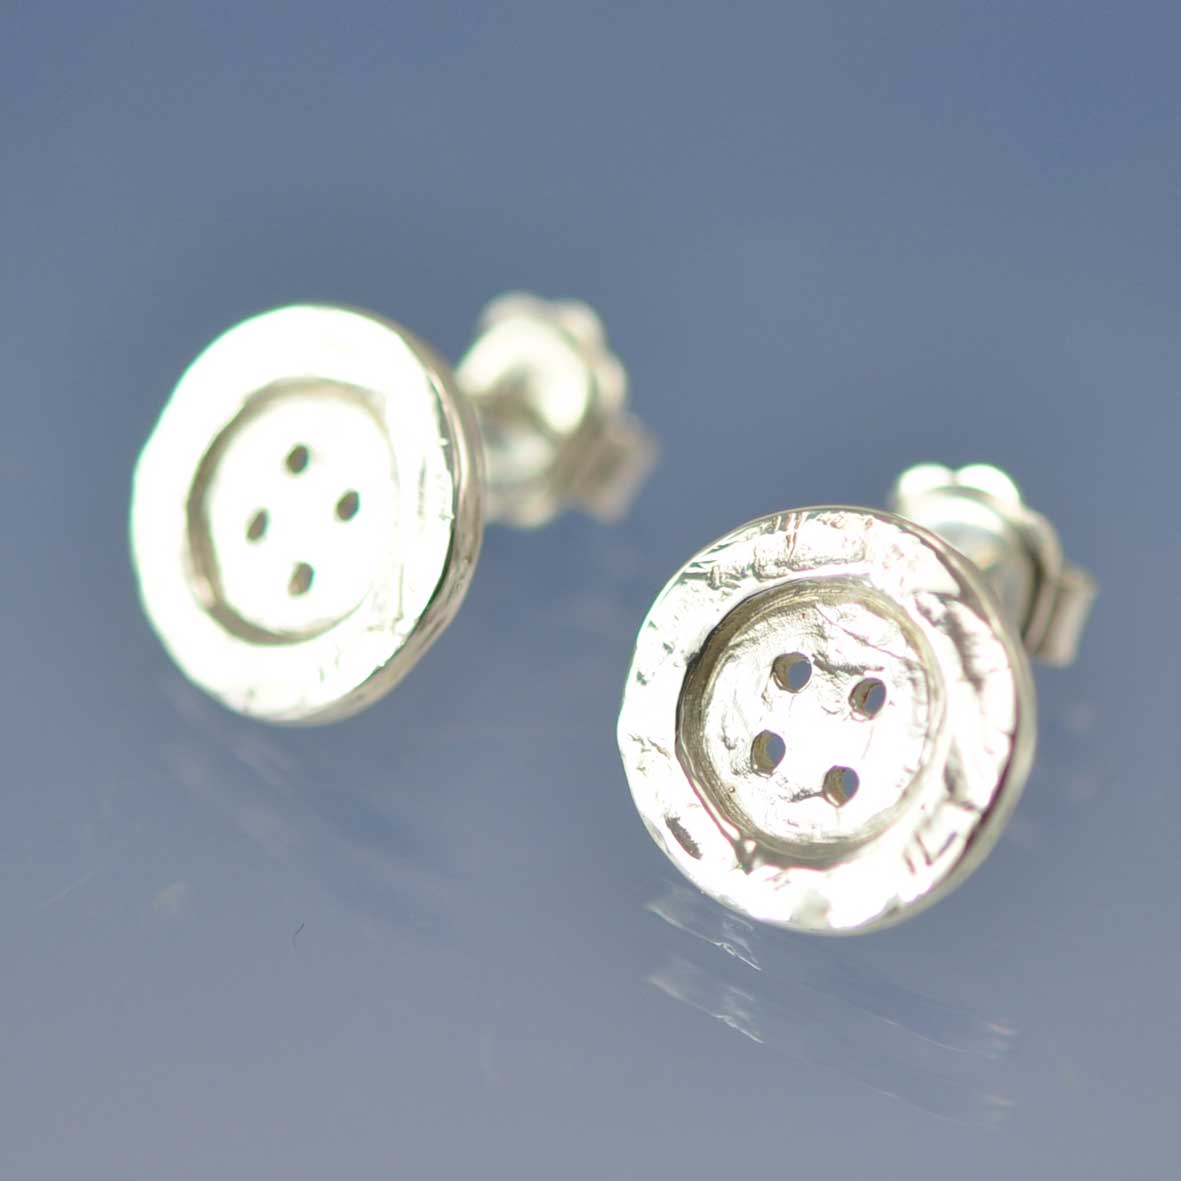 Shabby Chic Button Studs Earring by Chris Parry Jewellery